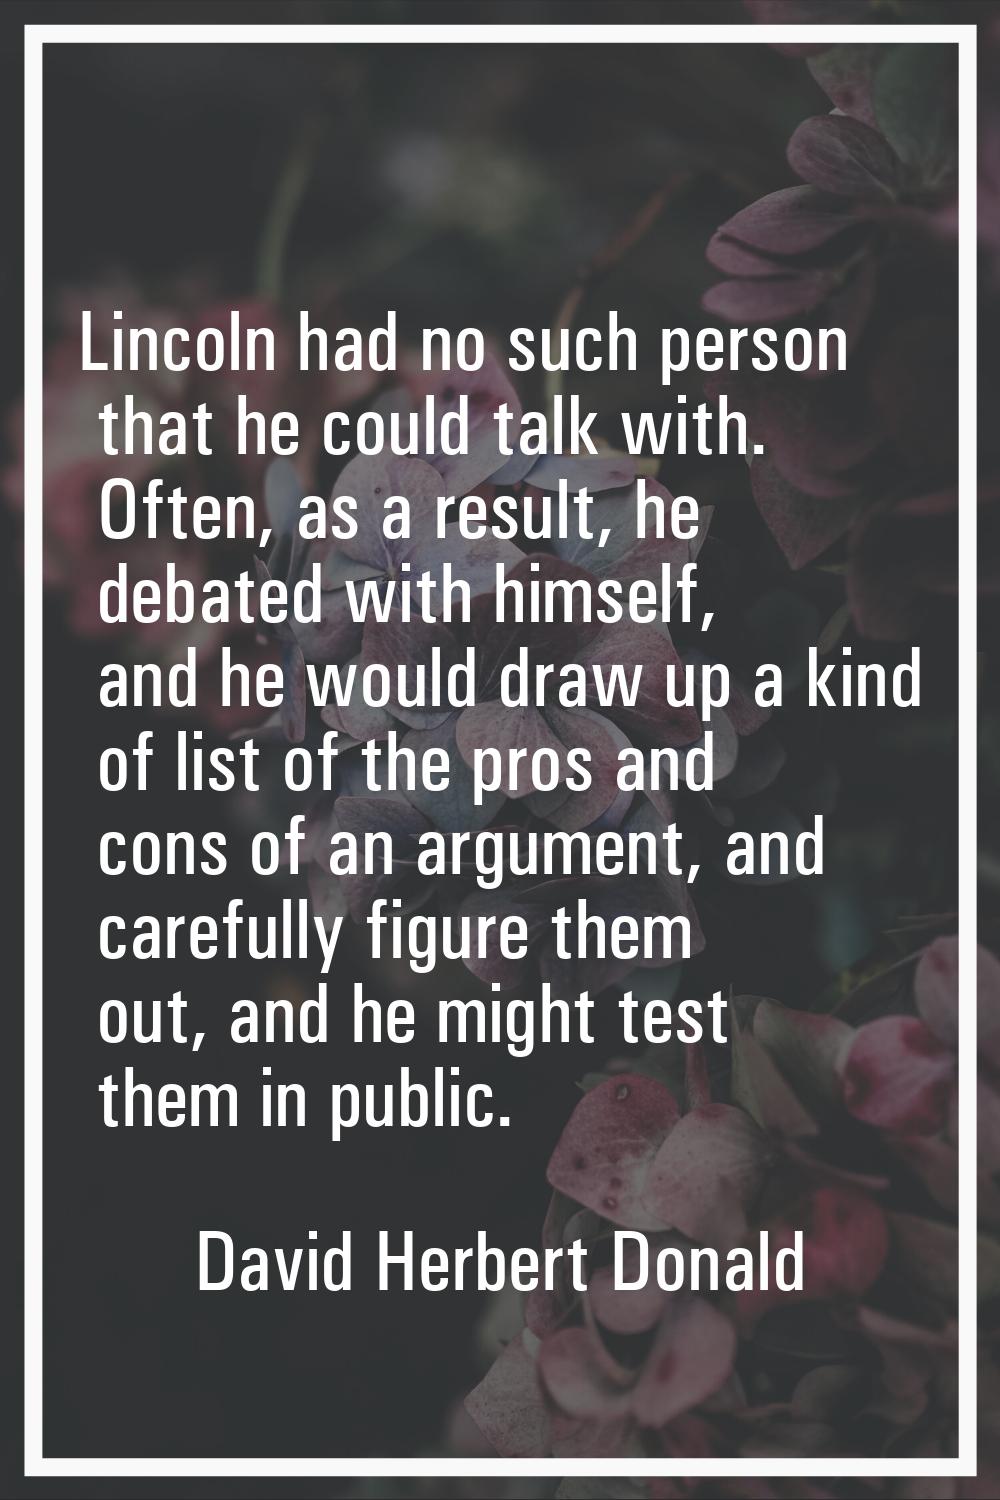 Lincoln had no such person that he could talk with. Often, as a result, he debated with himself, an